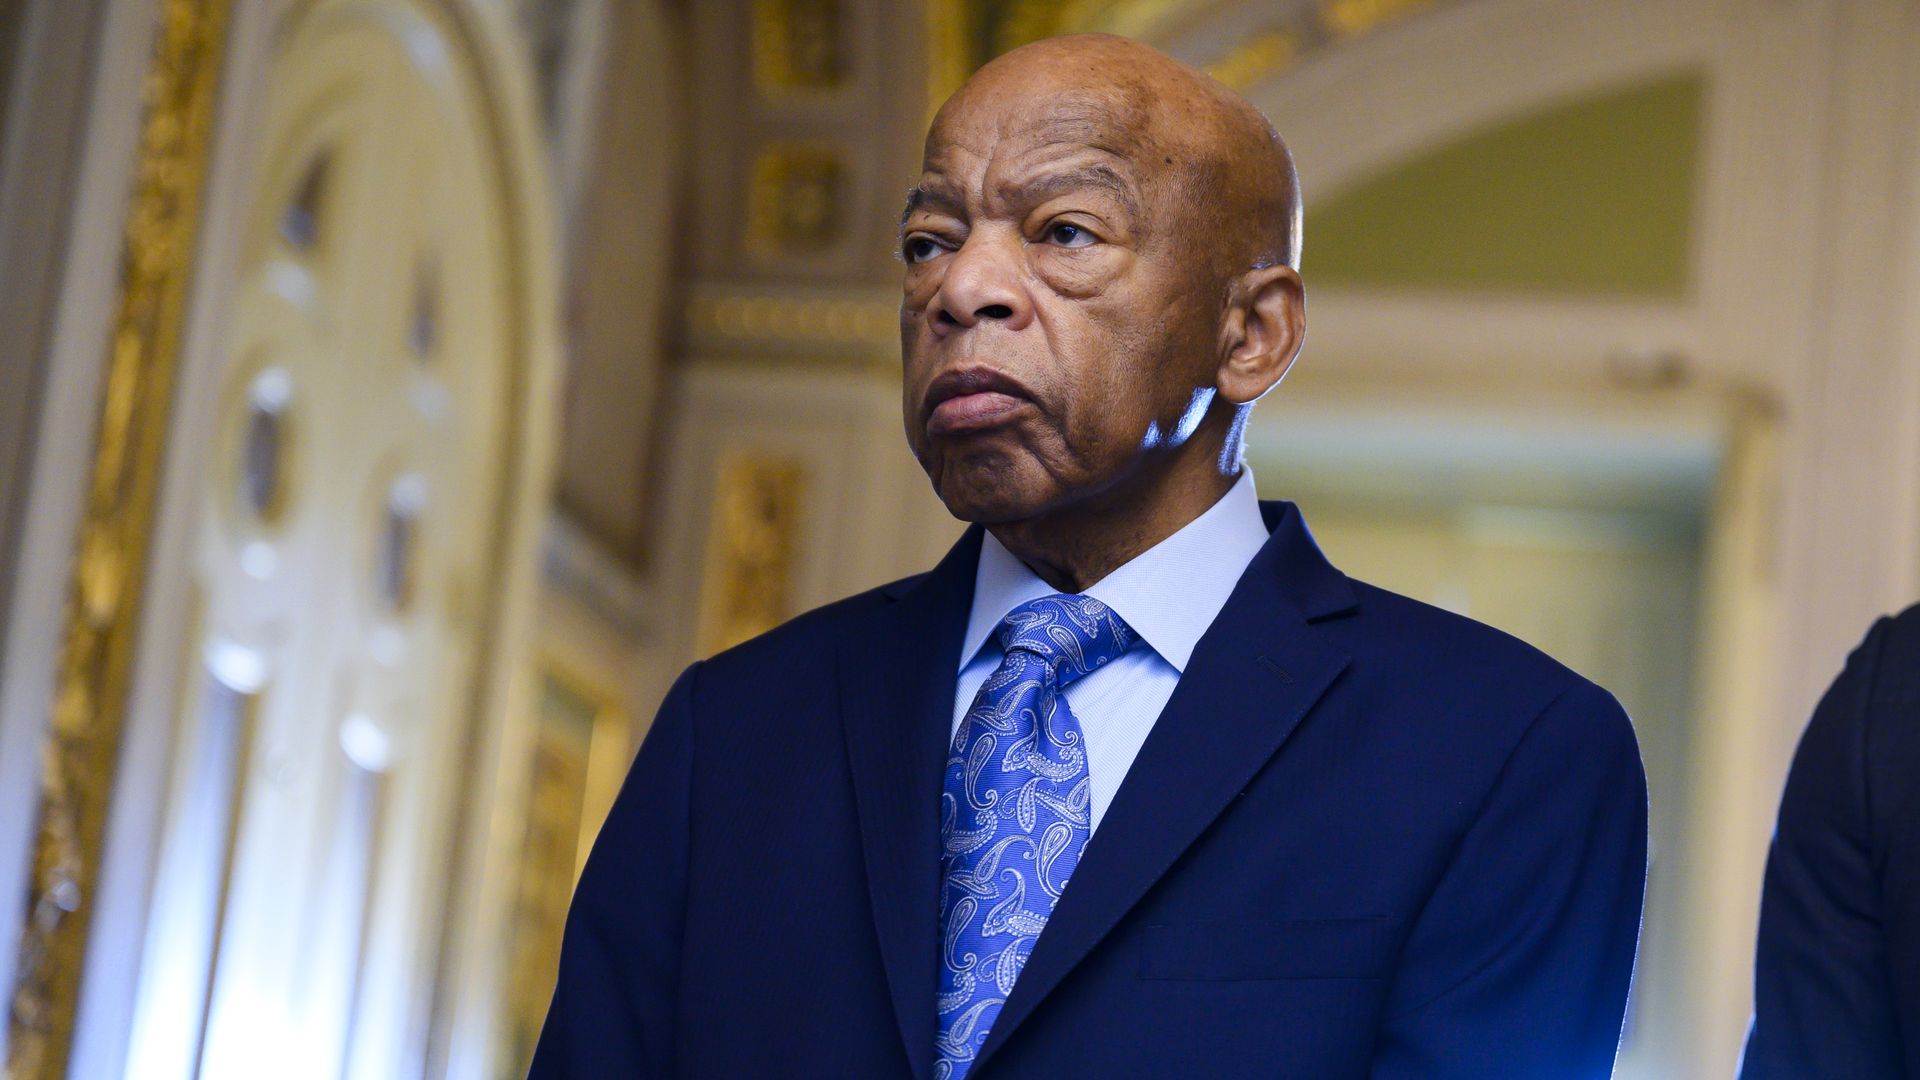 John Lewis stands in a suit and tie 